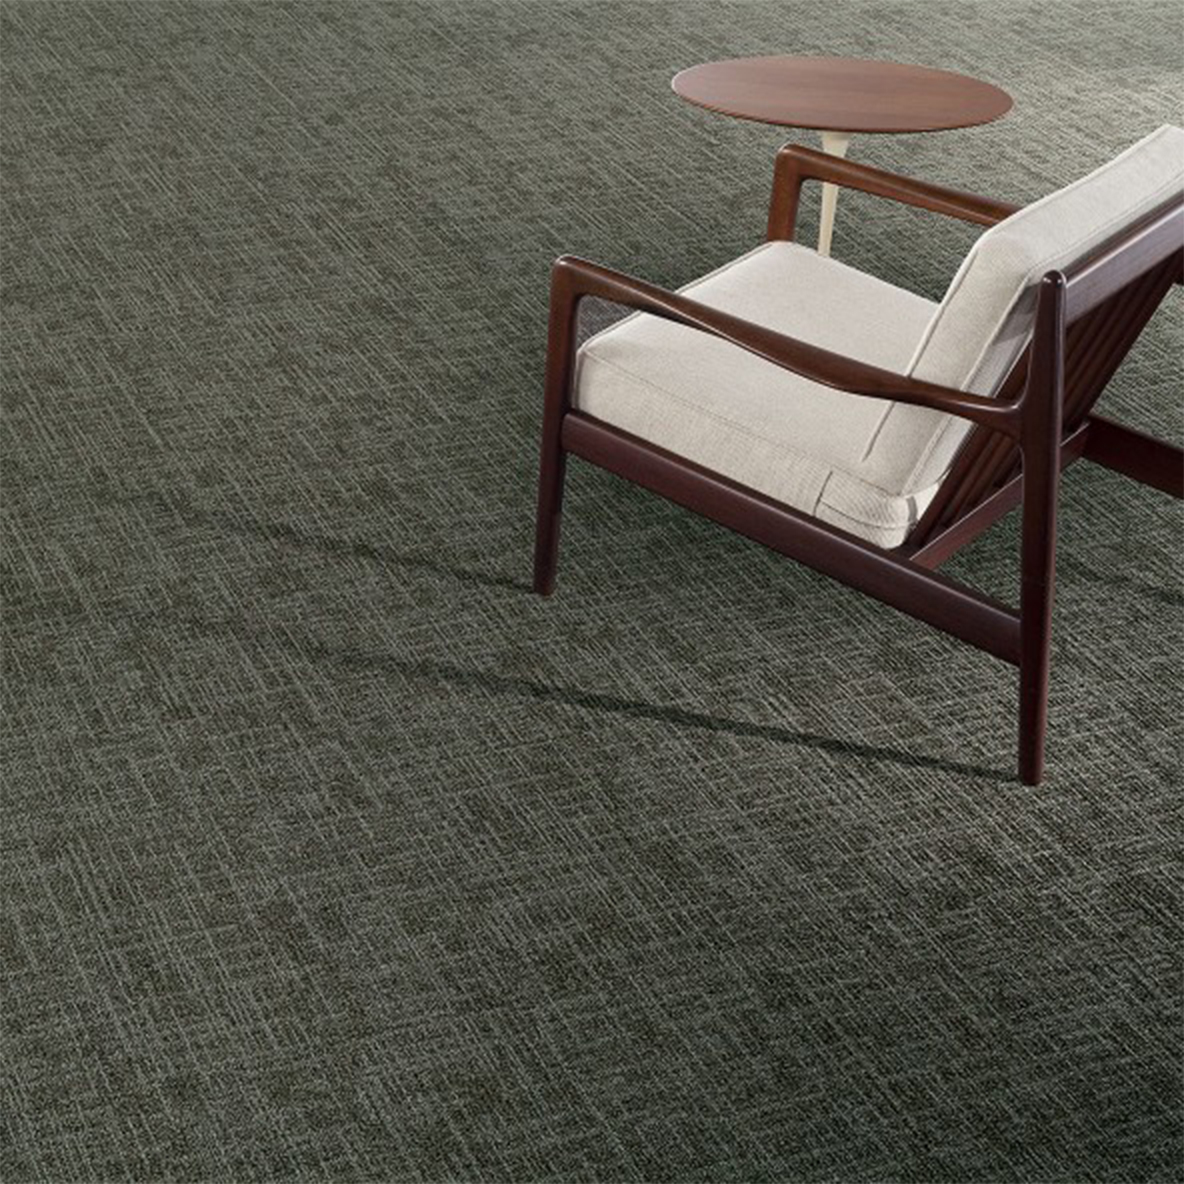 Waiting Room in Fossil Outer Banks Commercial Carpet Tile .32 Inch x 50x50 cm per Tile